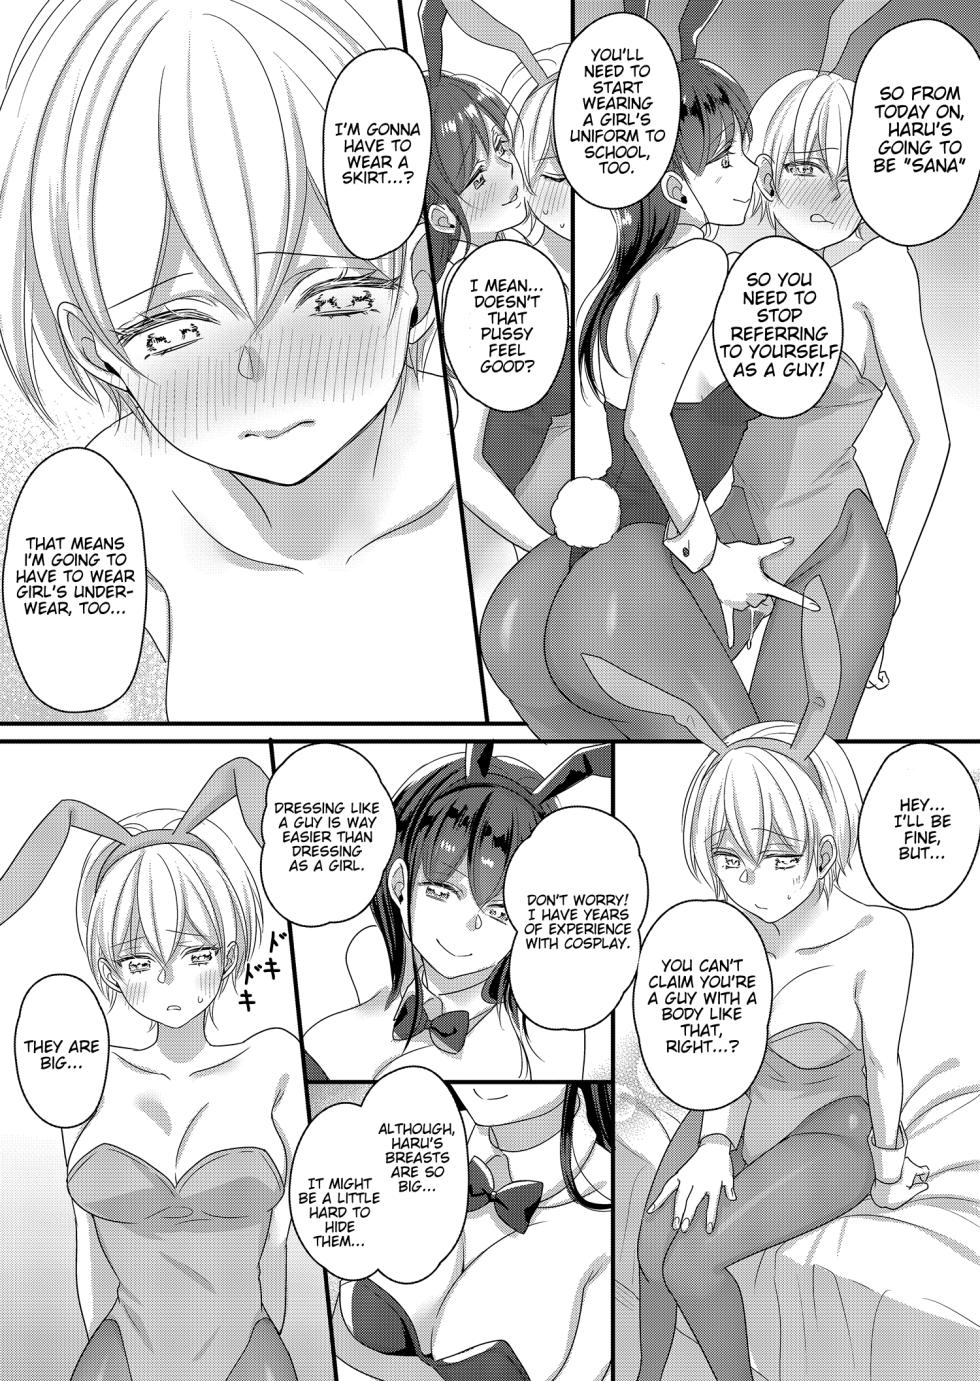 [Marialite (Lyna)] Haru to Sana 2 ～Love Connected Through Cosplay～[English] [Mikodayo] - Page 2